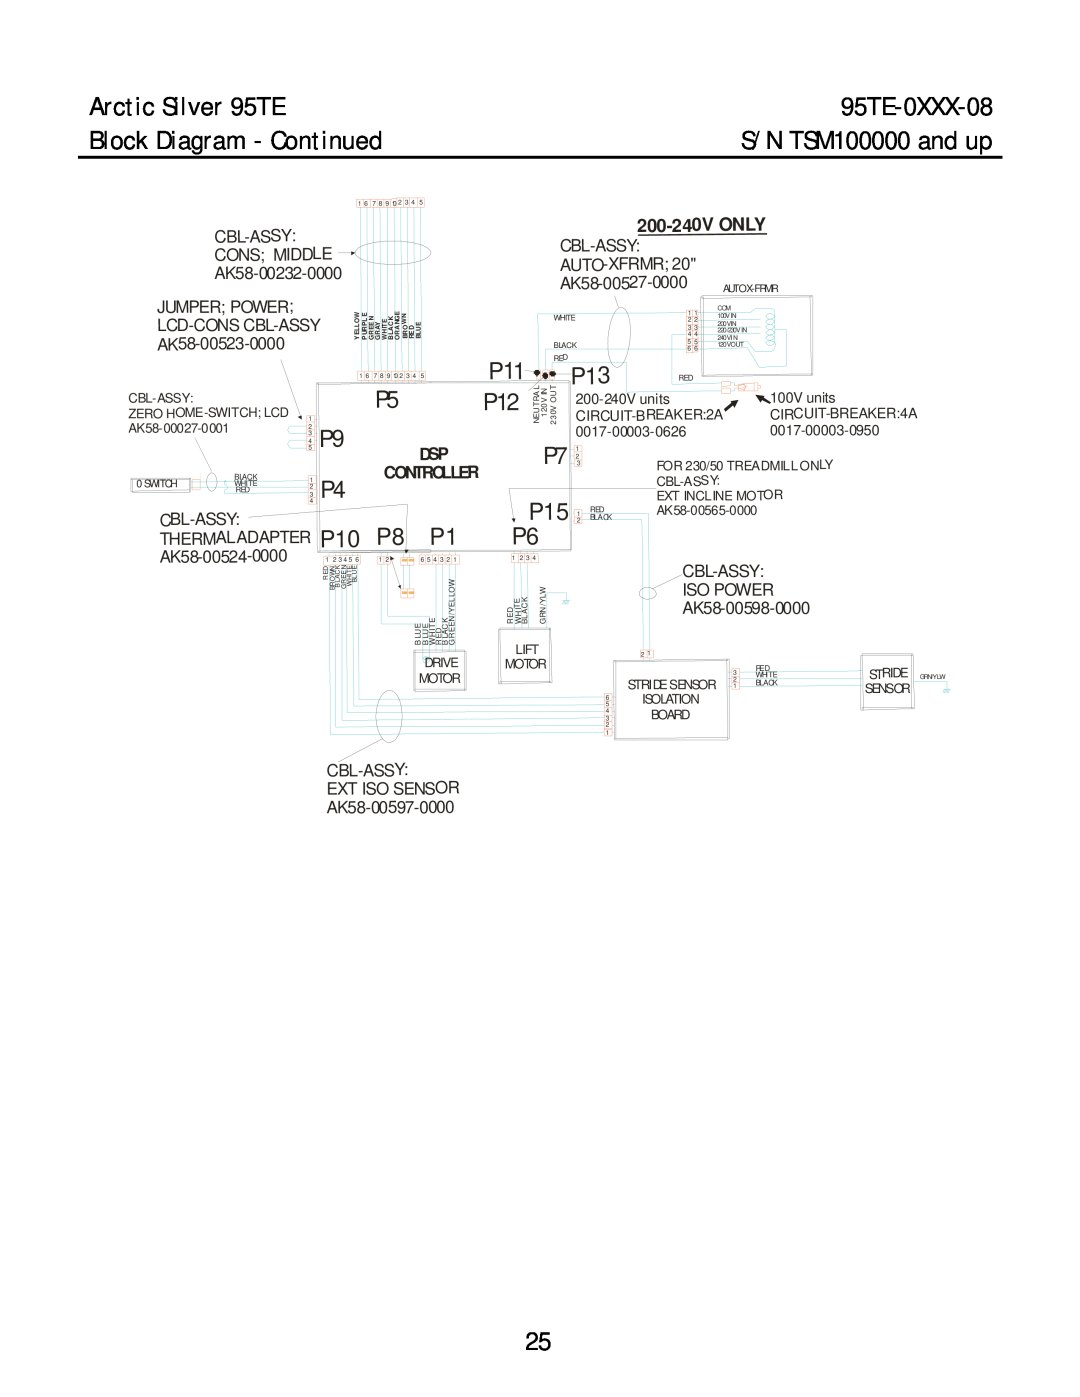 Life Fitness 95TE-0XXX-08 Block Diagram - Continued, Arctic Silver 95TE, S/N TSM100000 and up, Only, Controller, Cbl-Assy 